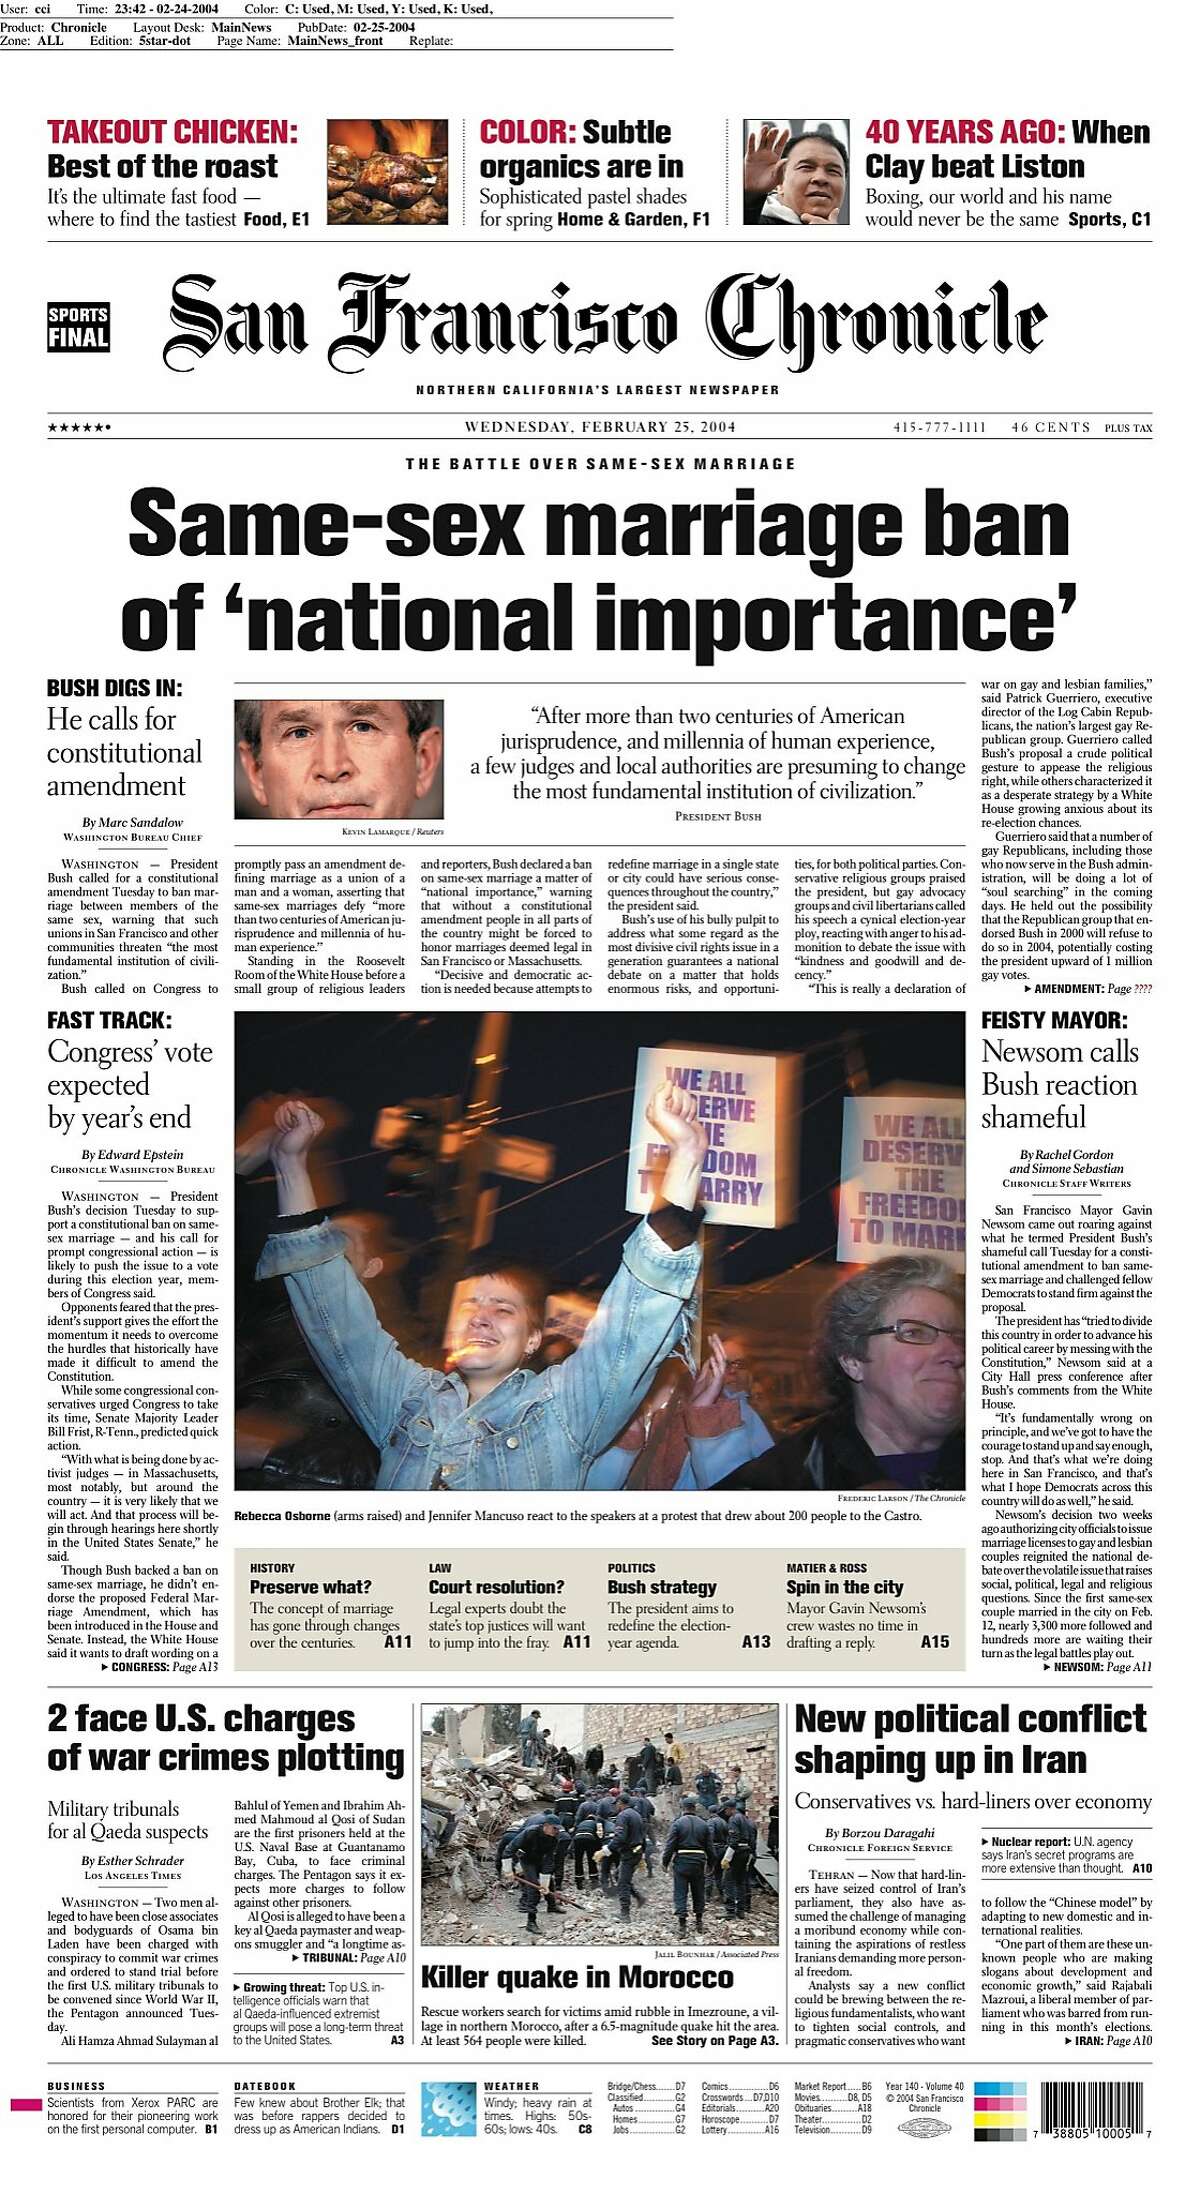 Historic Chronicle front page from February 25, 2004 announcing President George Bush's call for a ban on same-sex marriage.